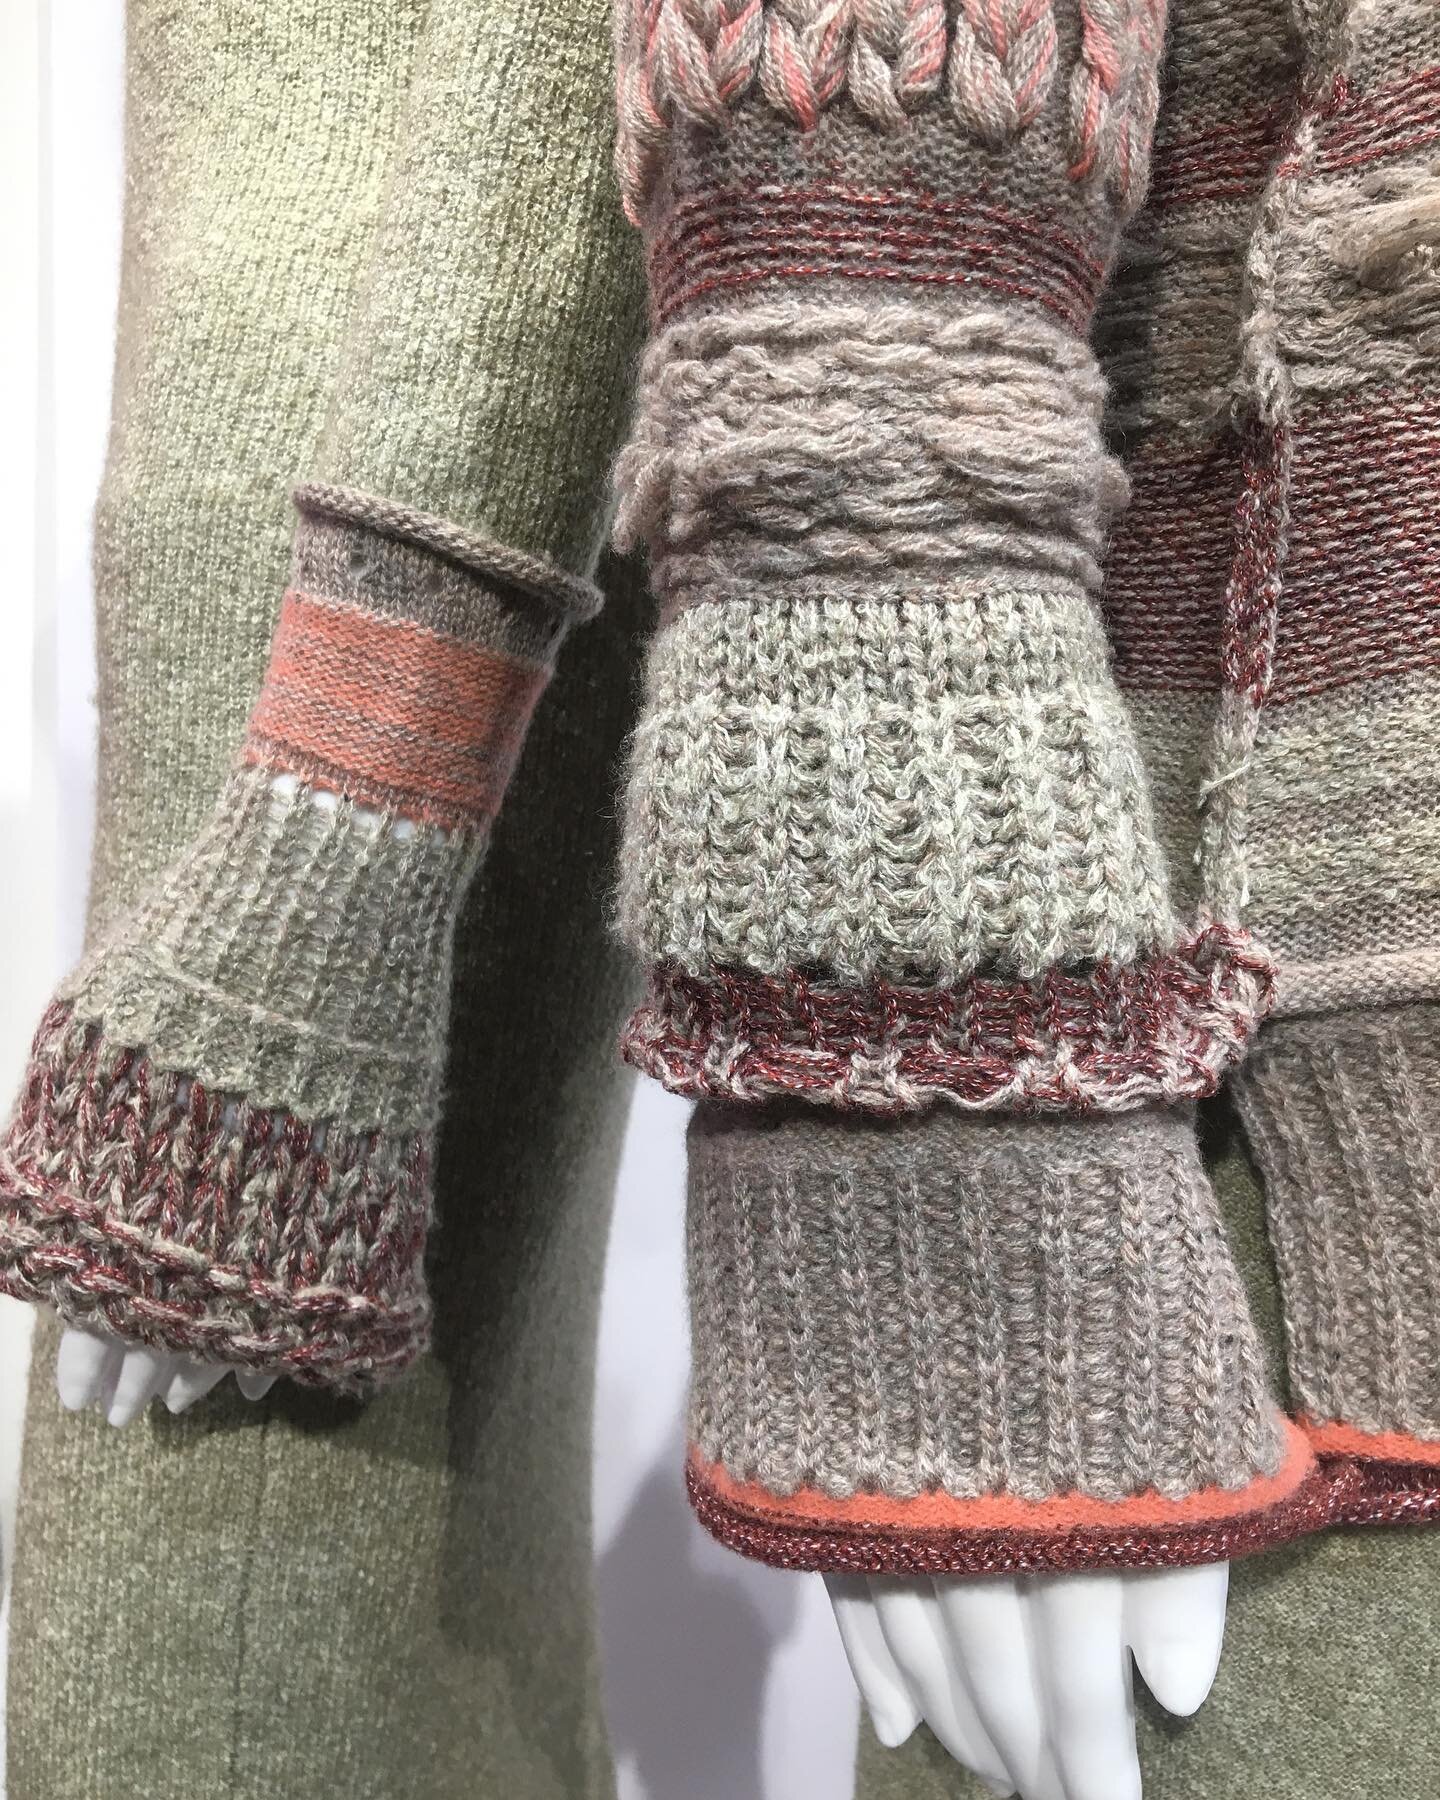 Texture mixing - hand and machine knits blend into one. 🧶 
Made by MRC

#knitwear
#handknit
#mrcknitwear
#artisanal
#madeinItaly
#innovation
#textiles
#technicaltextiles
#embroidery 
#chunkyknit
#textures
#knitting
#knit
#knitlab
#knittersofinstagra